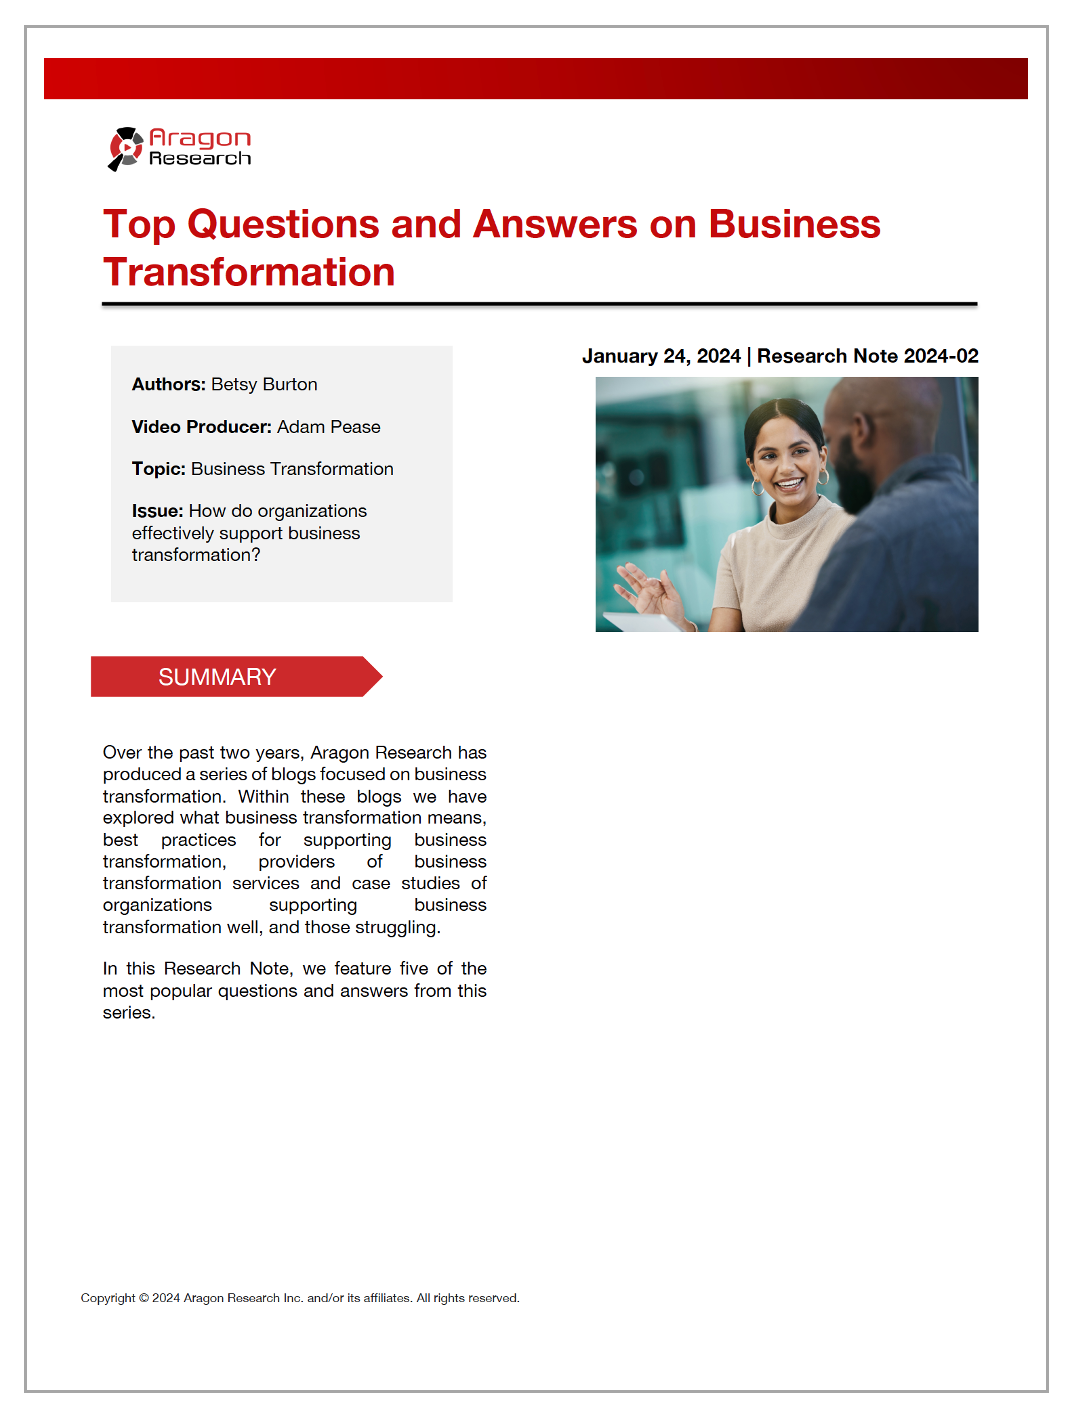 2024-02 Top Questions and Answers on Business Transformation